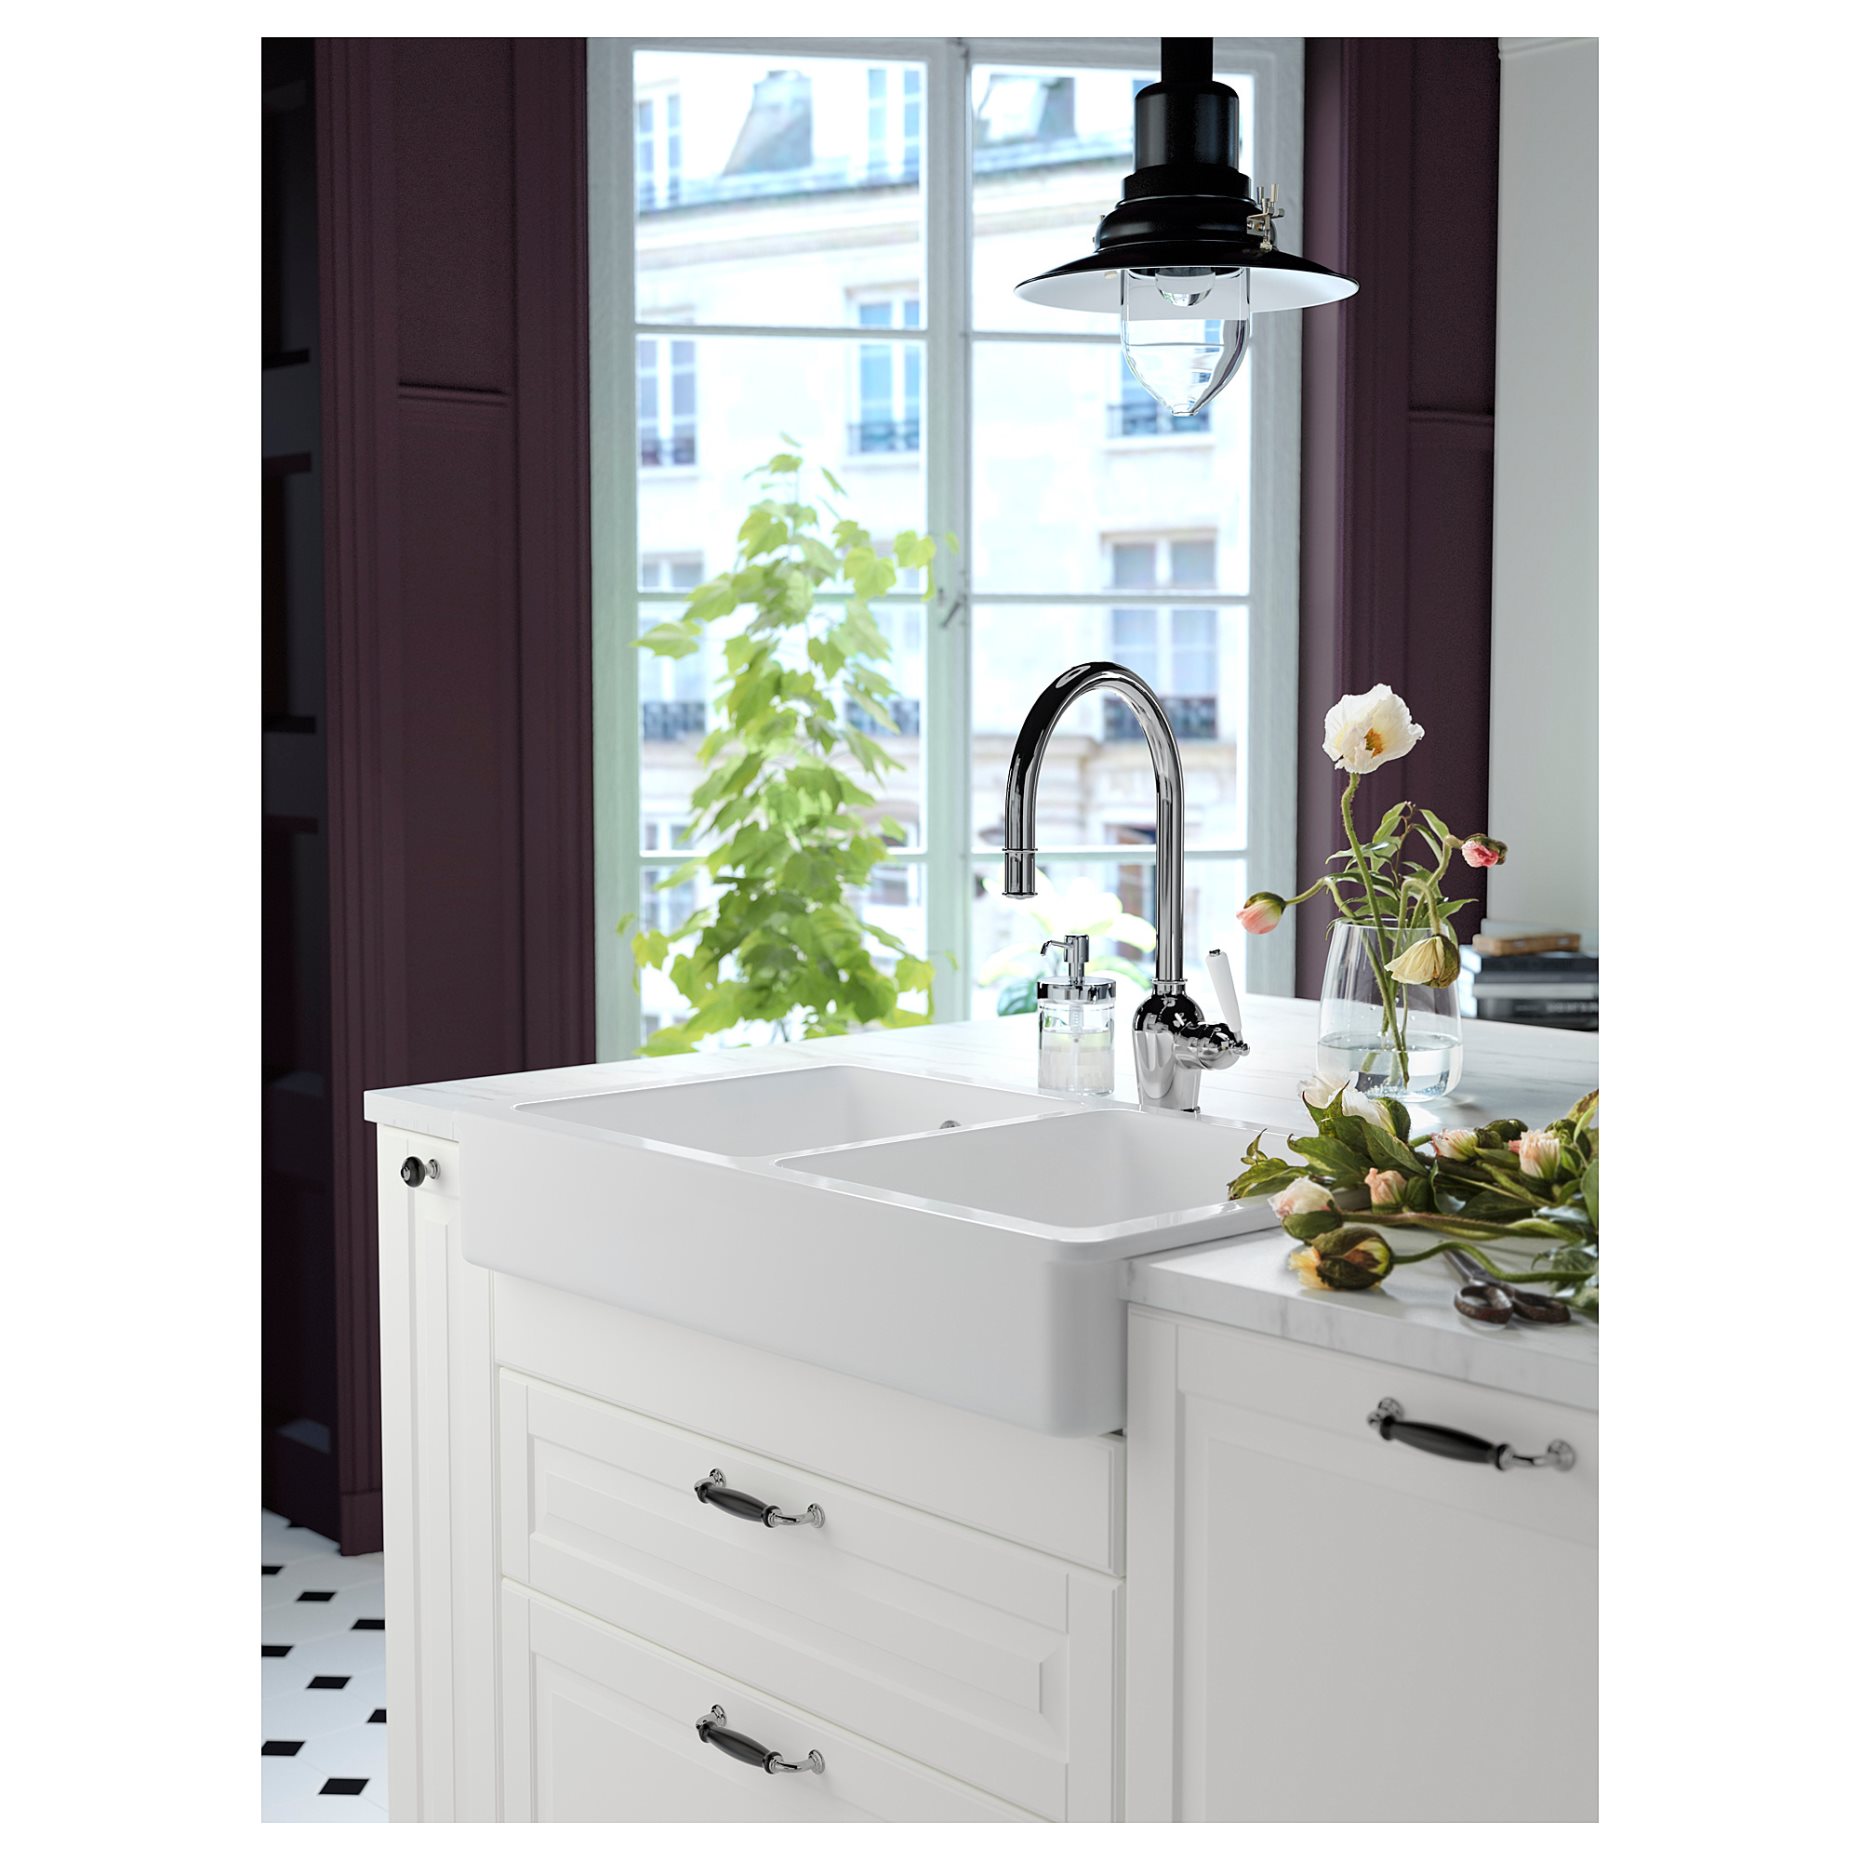 INSJÖN, kitchen mixer tap with pull-out spout, 203.418.71